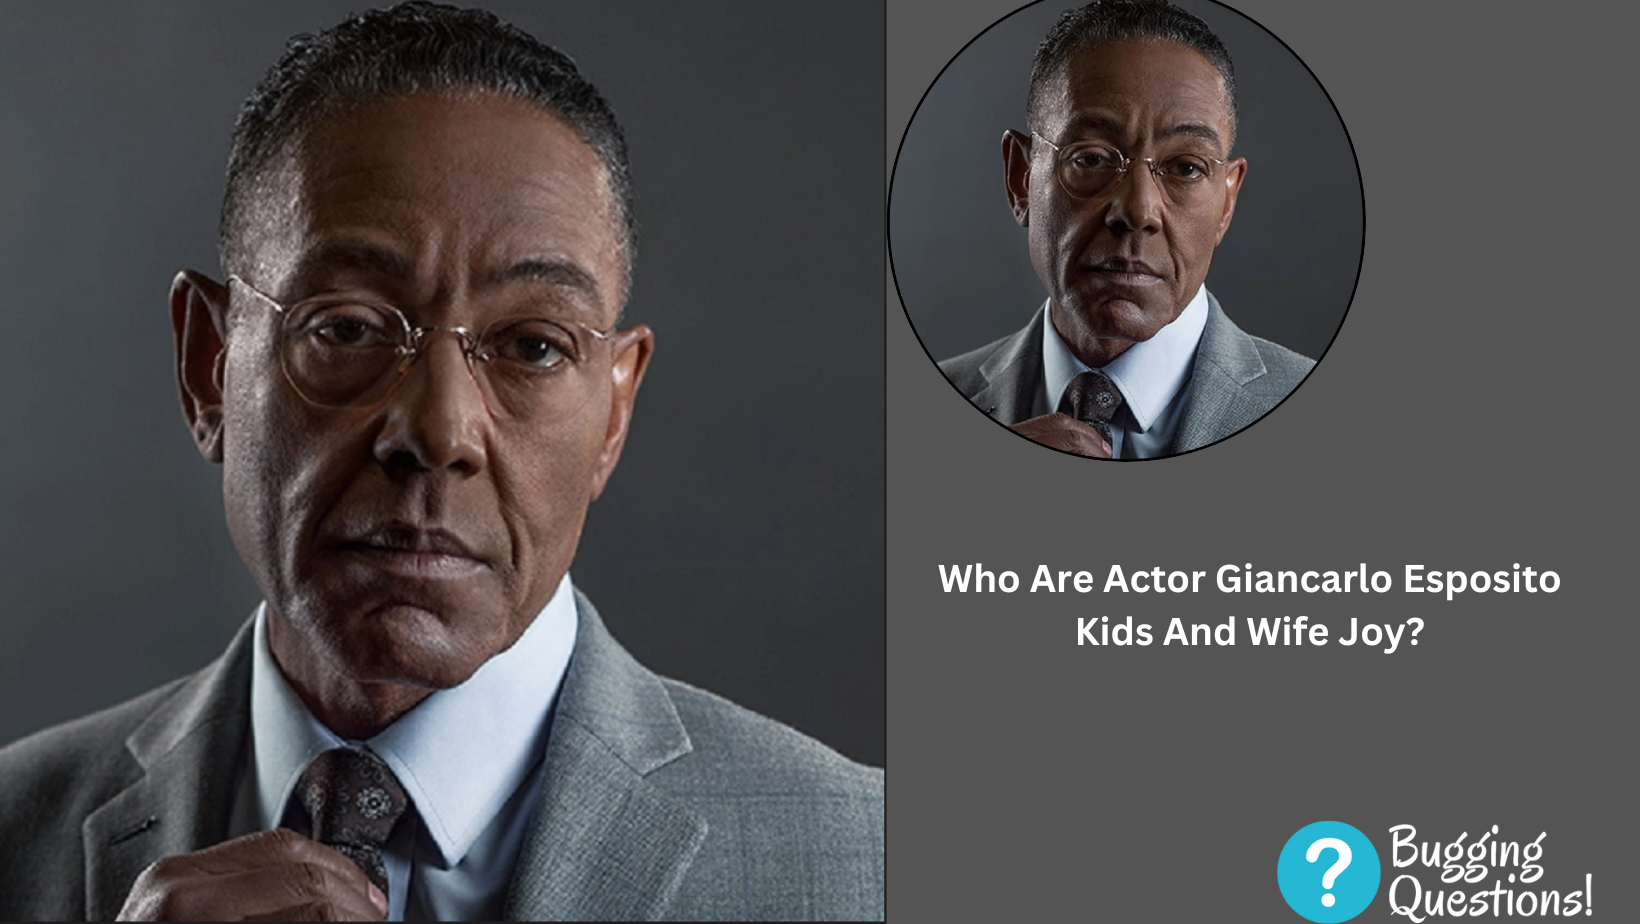 Who Are Actor Giancarlo Esposito Kids And Wife Joy?